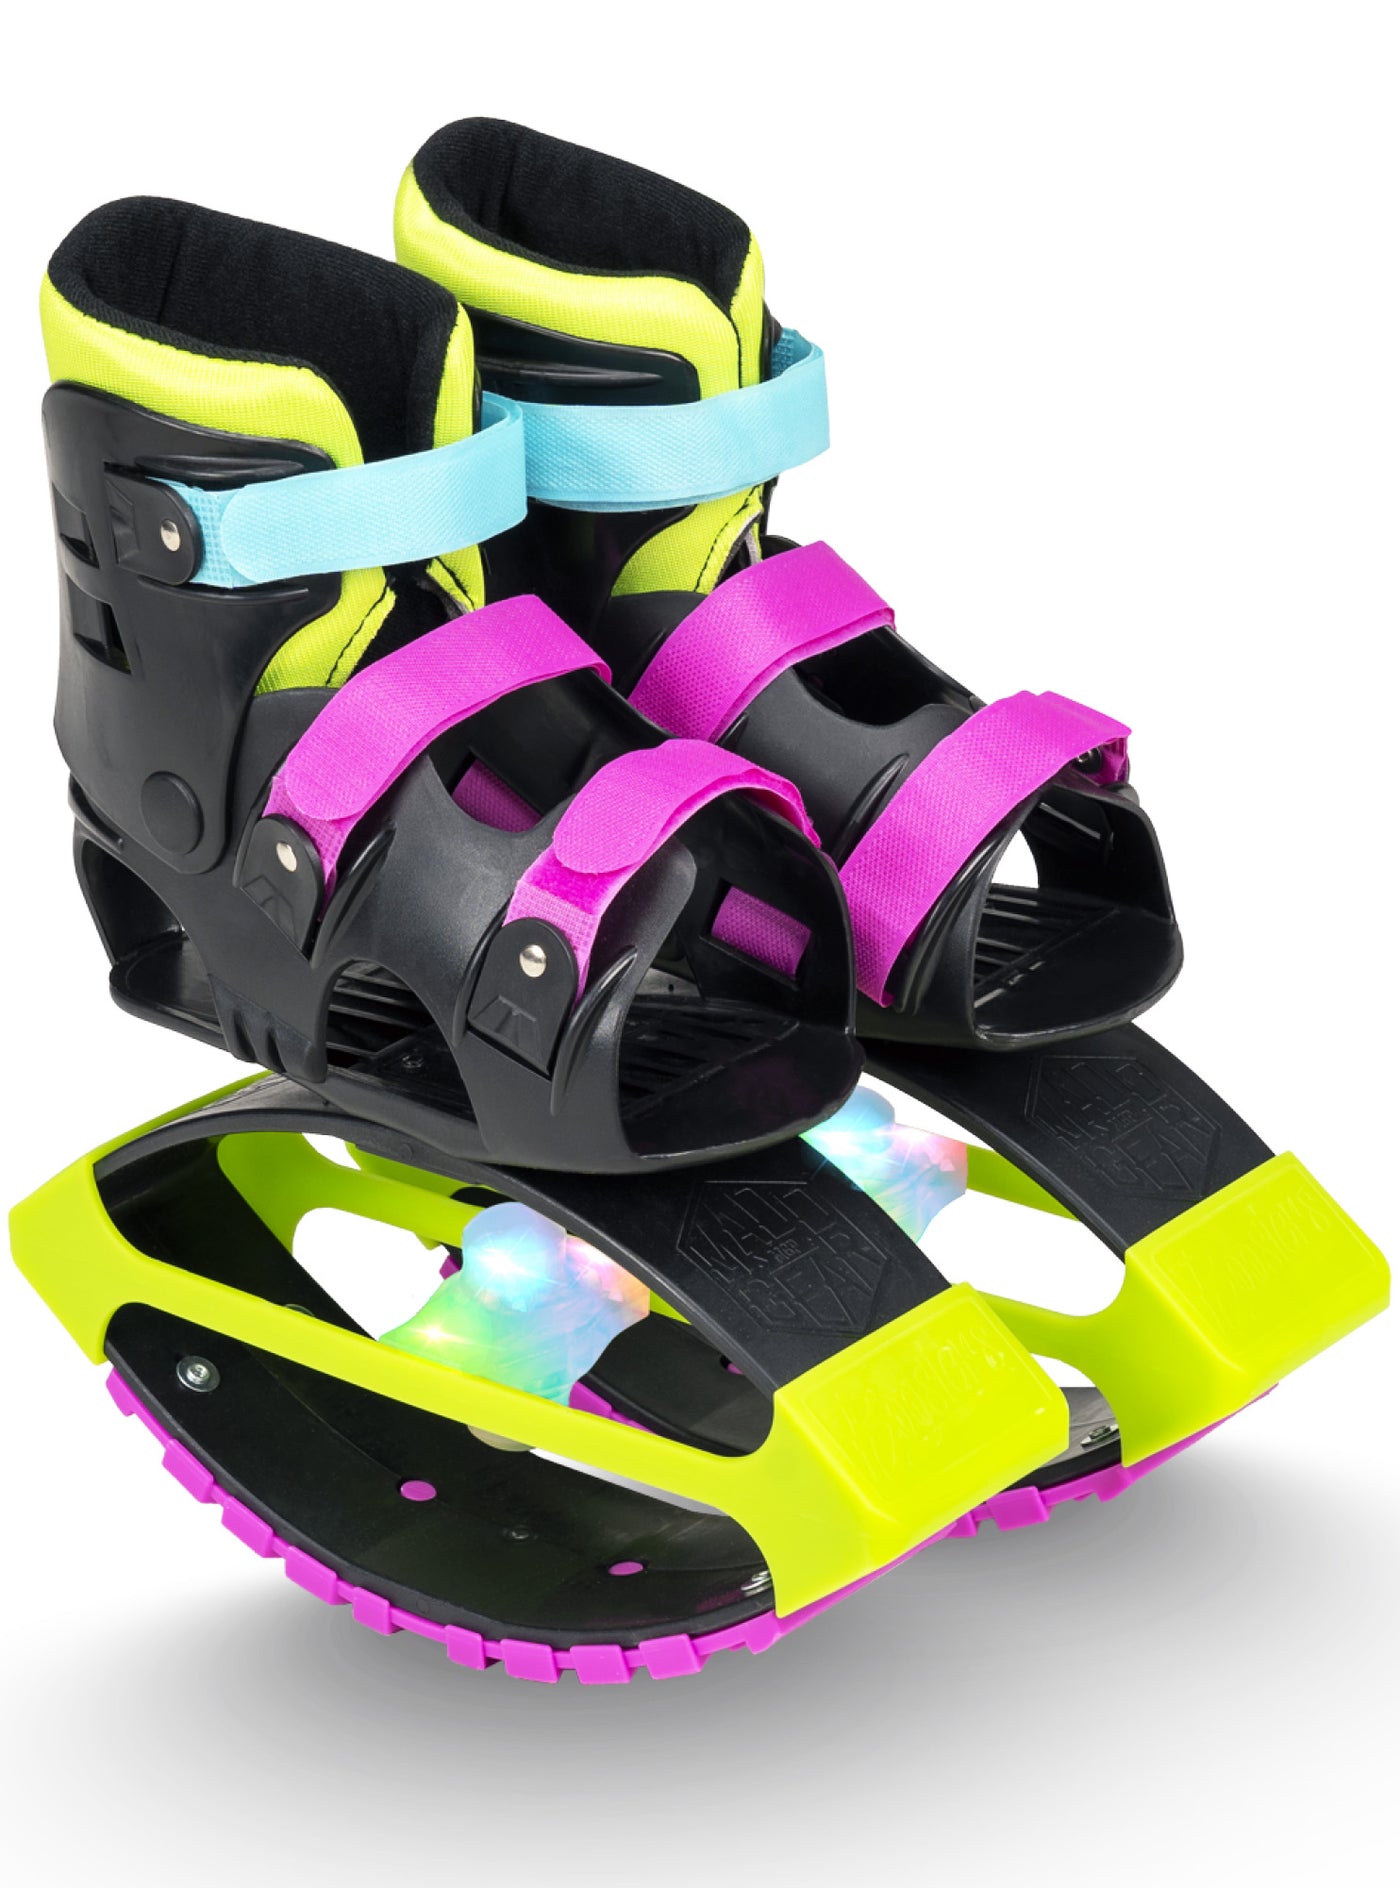 Madd Gear Boost Boots Boosters Jumping Shoes Kanga Space Boots Boys Girls Pink Teal Lime